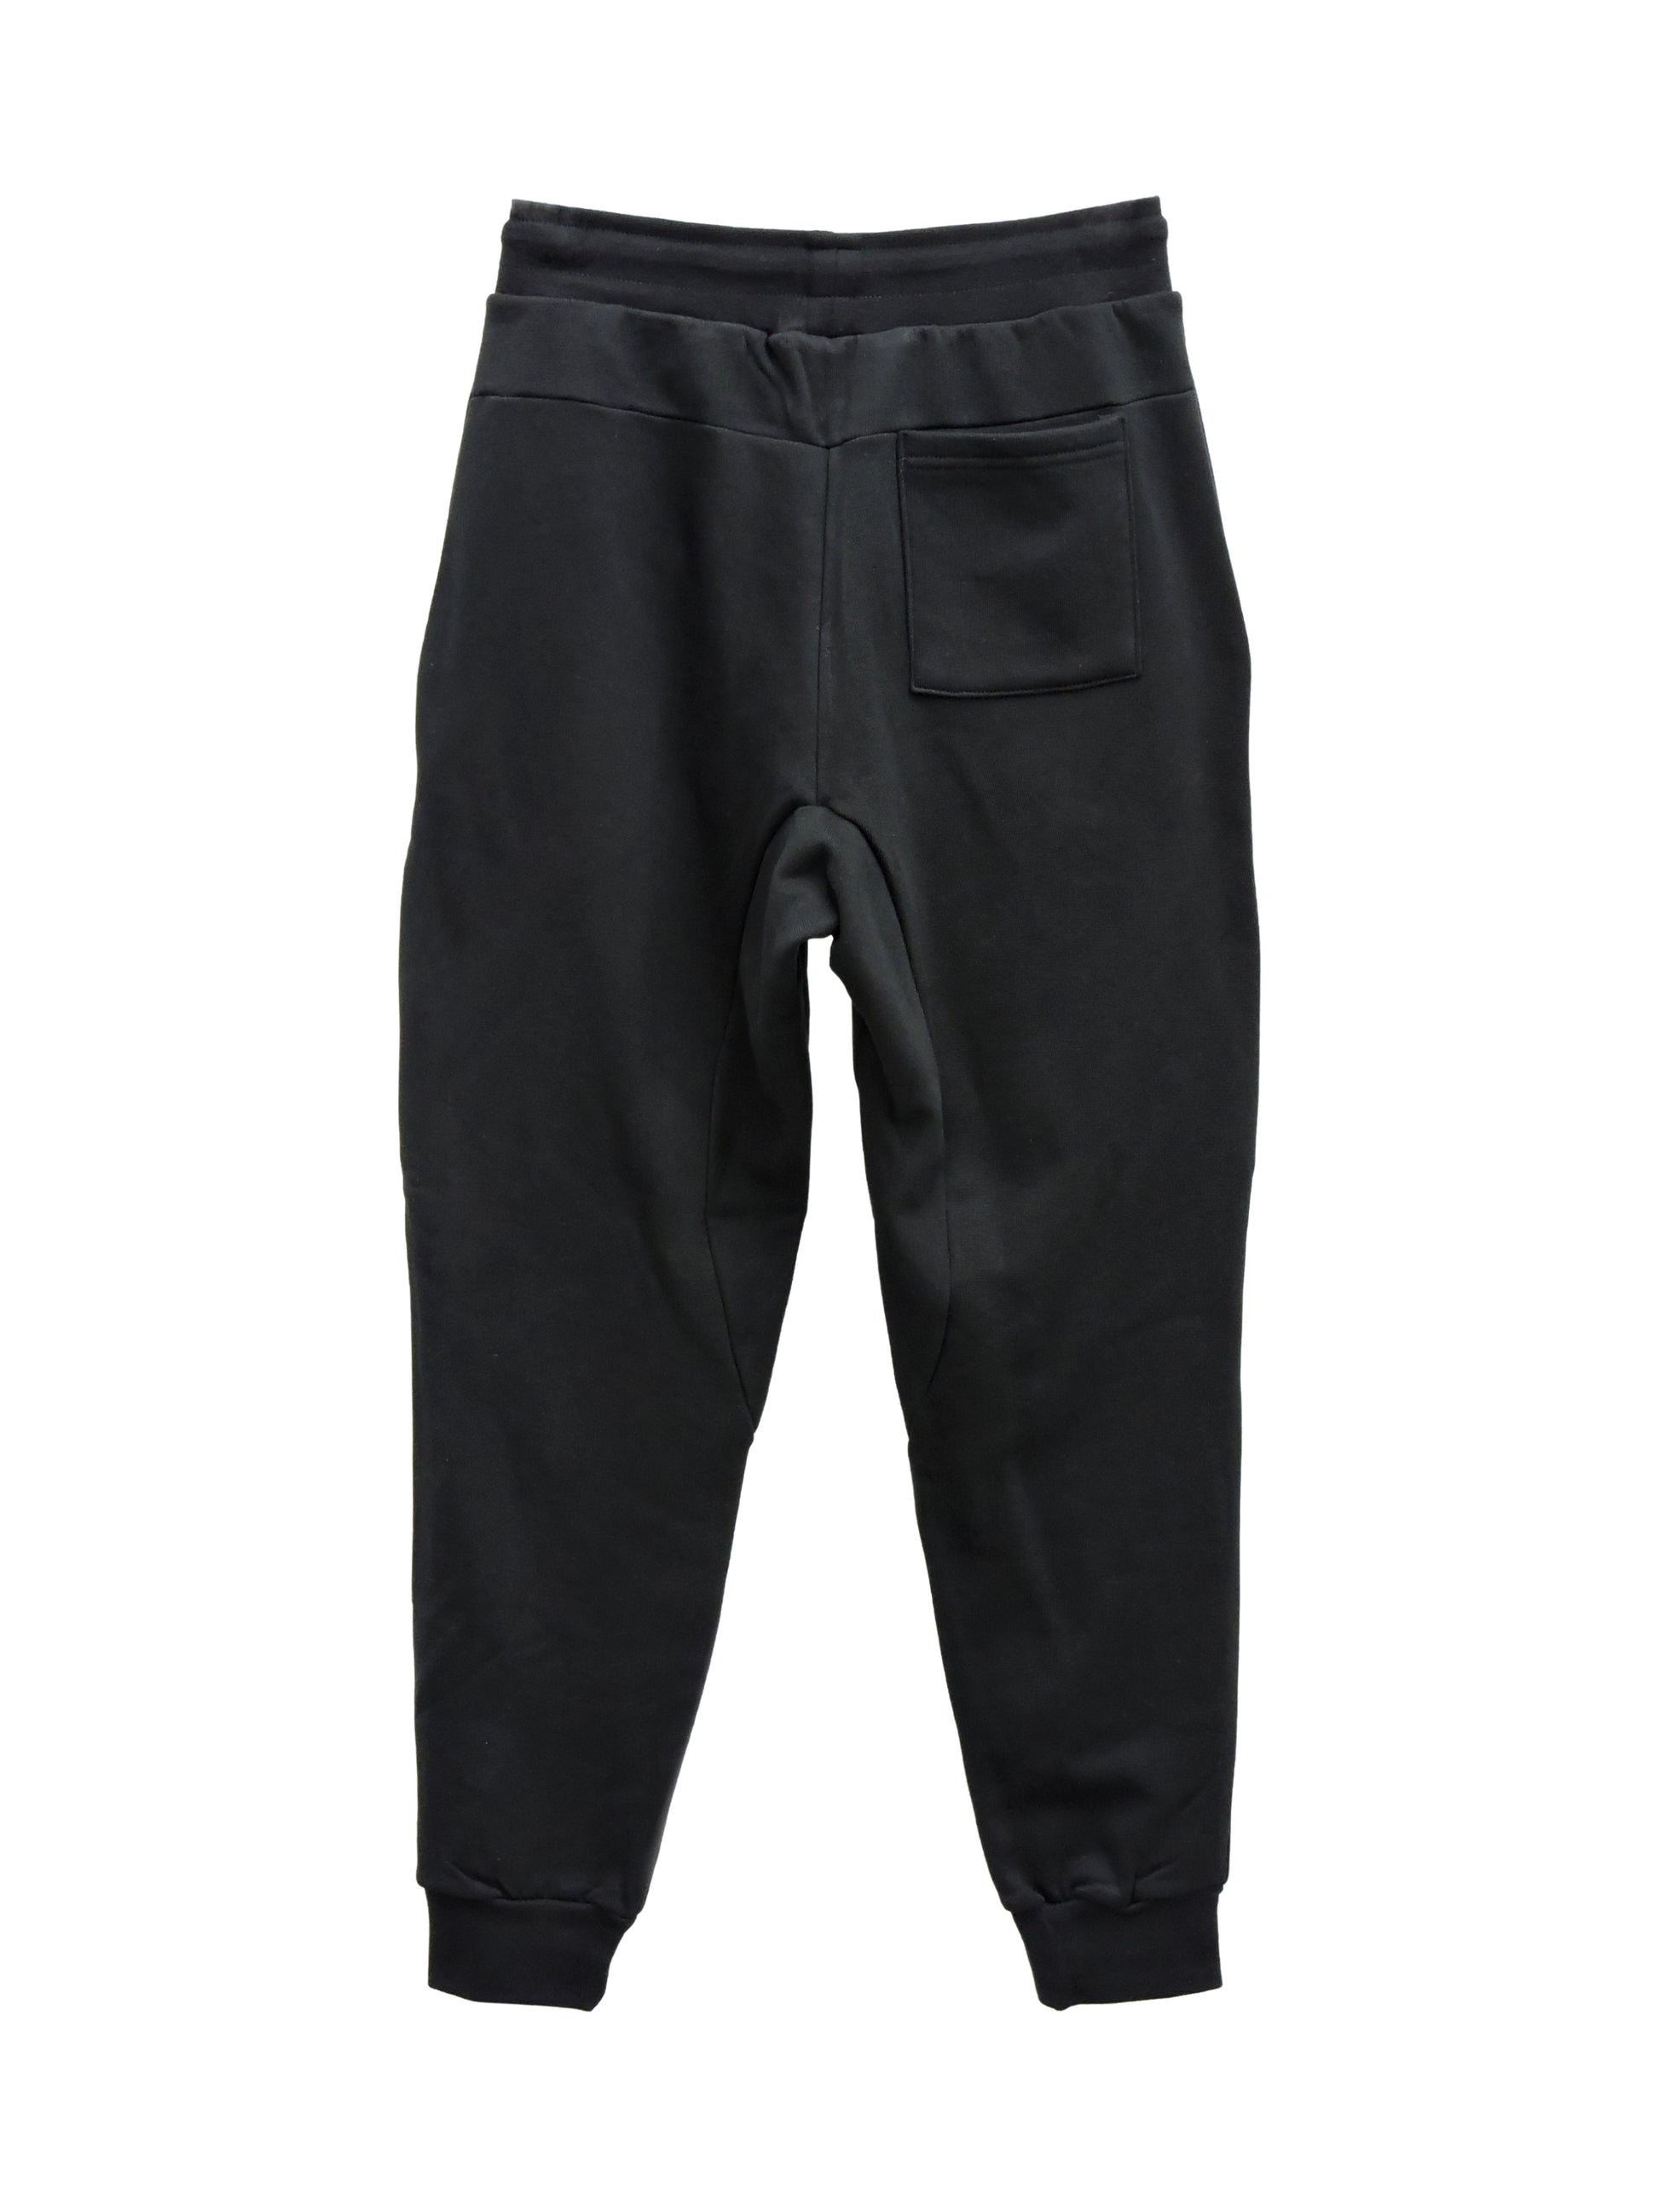 Black French Terry Jogger, 350 GSM Organic Cotton